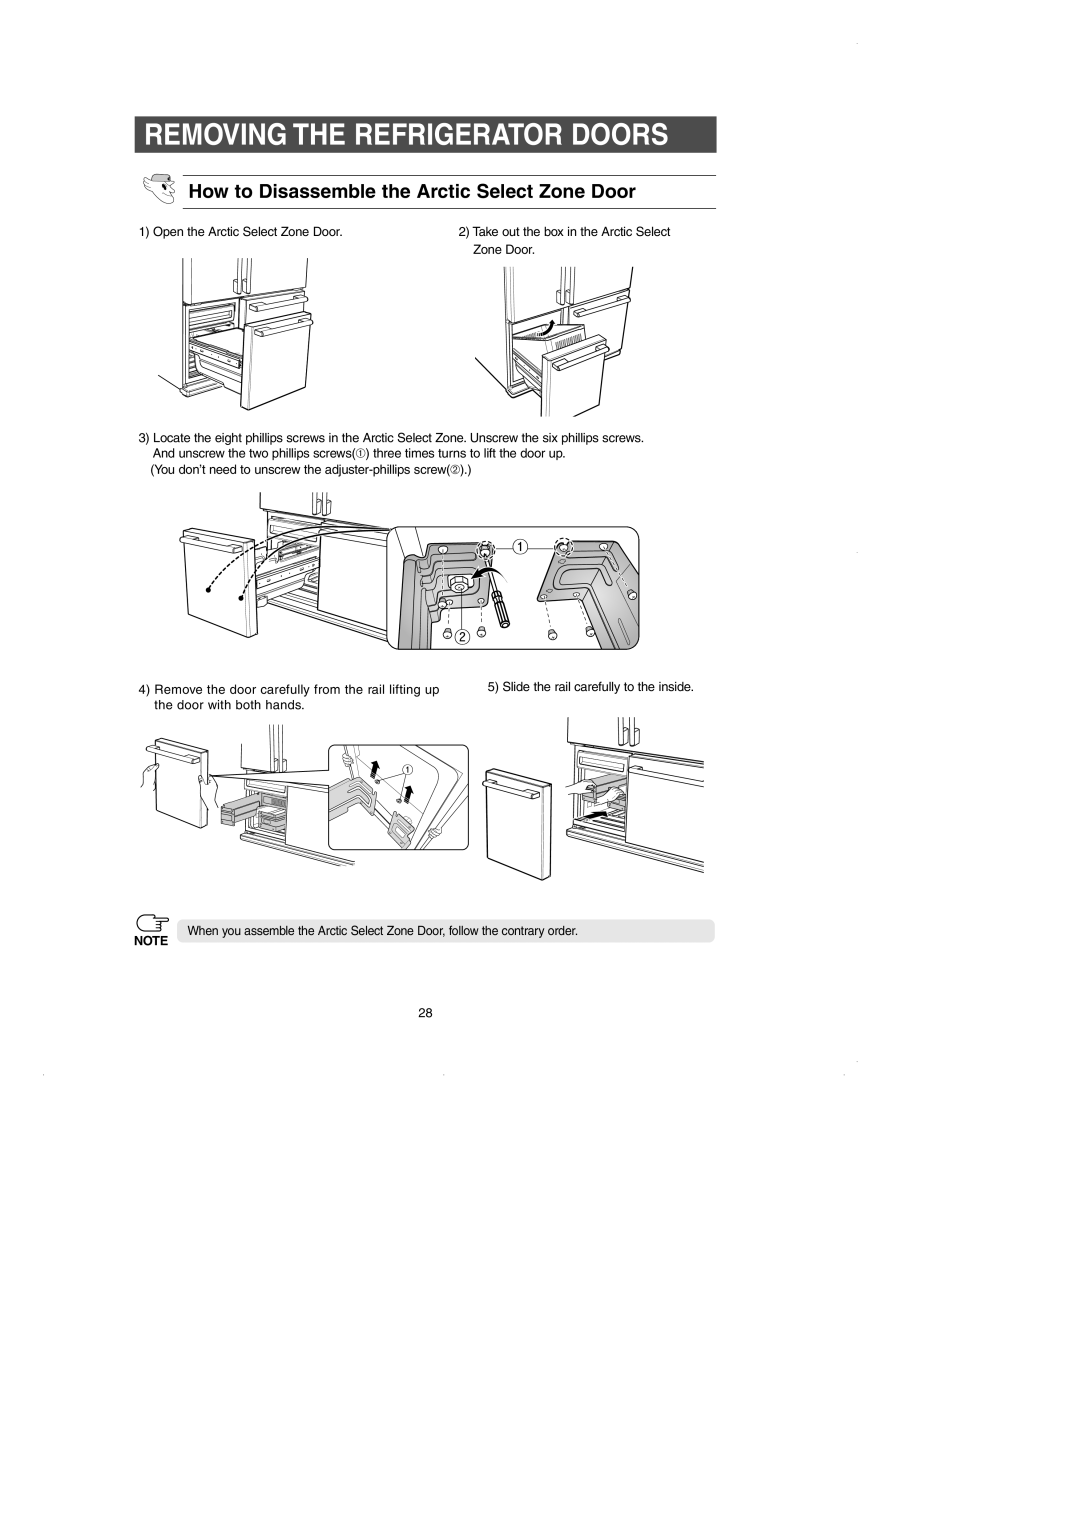 GE RM25 owner manual How to Disassemble the Arctic Select Zone Door, Removing The Refrigerator Doors 